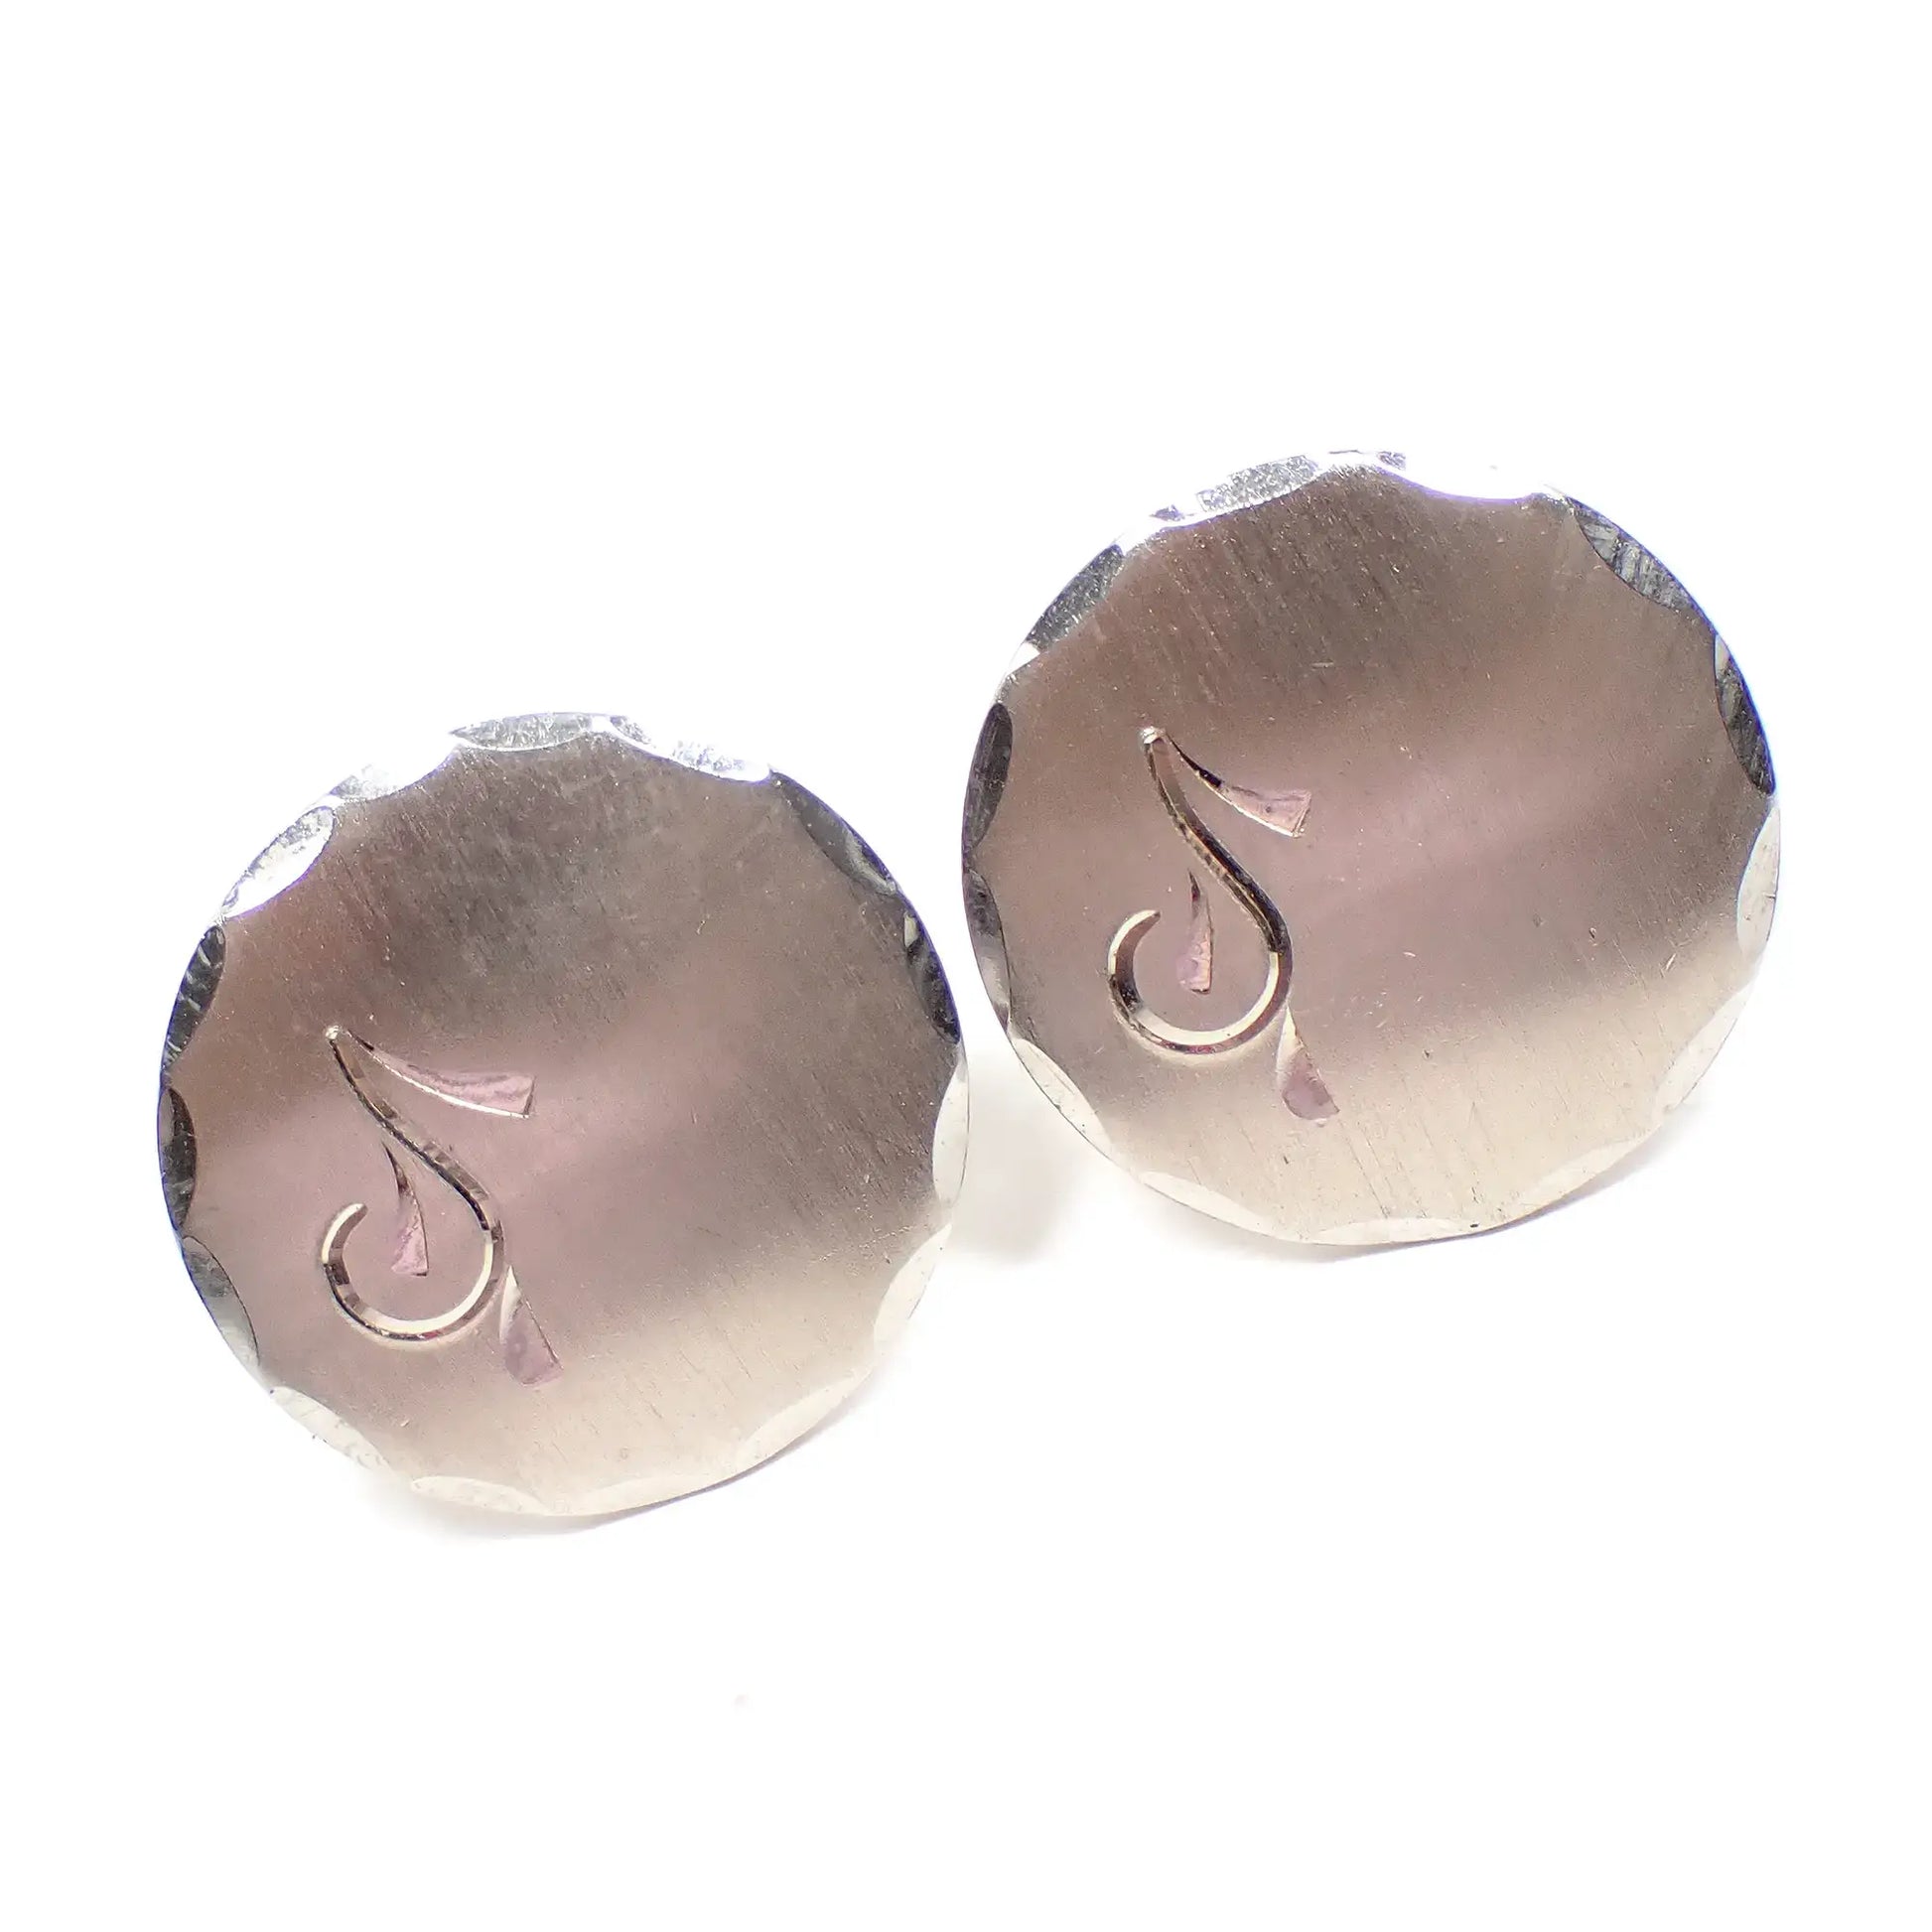 Angled front view of the Mid Century vintage Foster cufflinks. The metal is silver tone in color with a matte brushed appearance on the fronts. They are round shaped with a faceted edge and have an etched design on one side that looks kind of like a musical note.